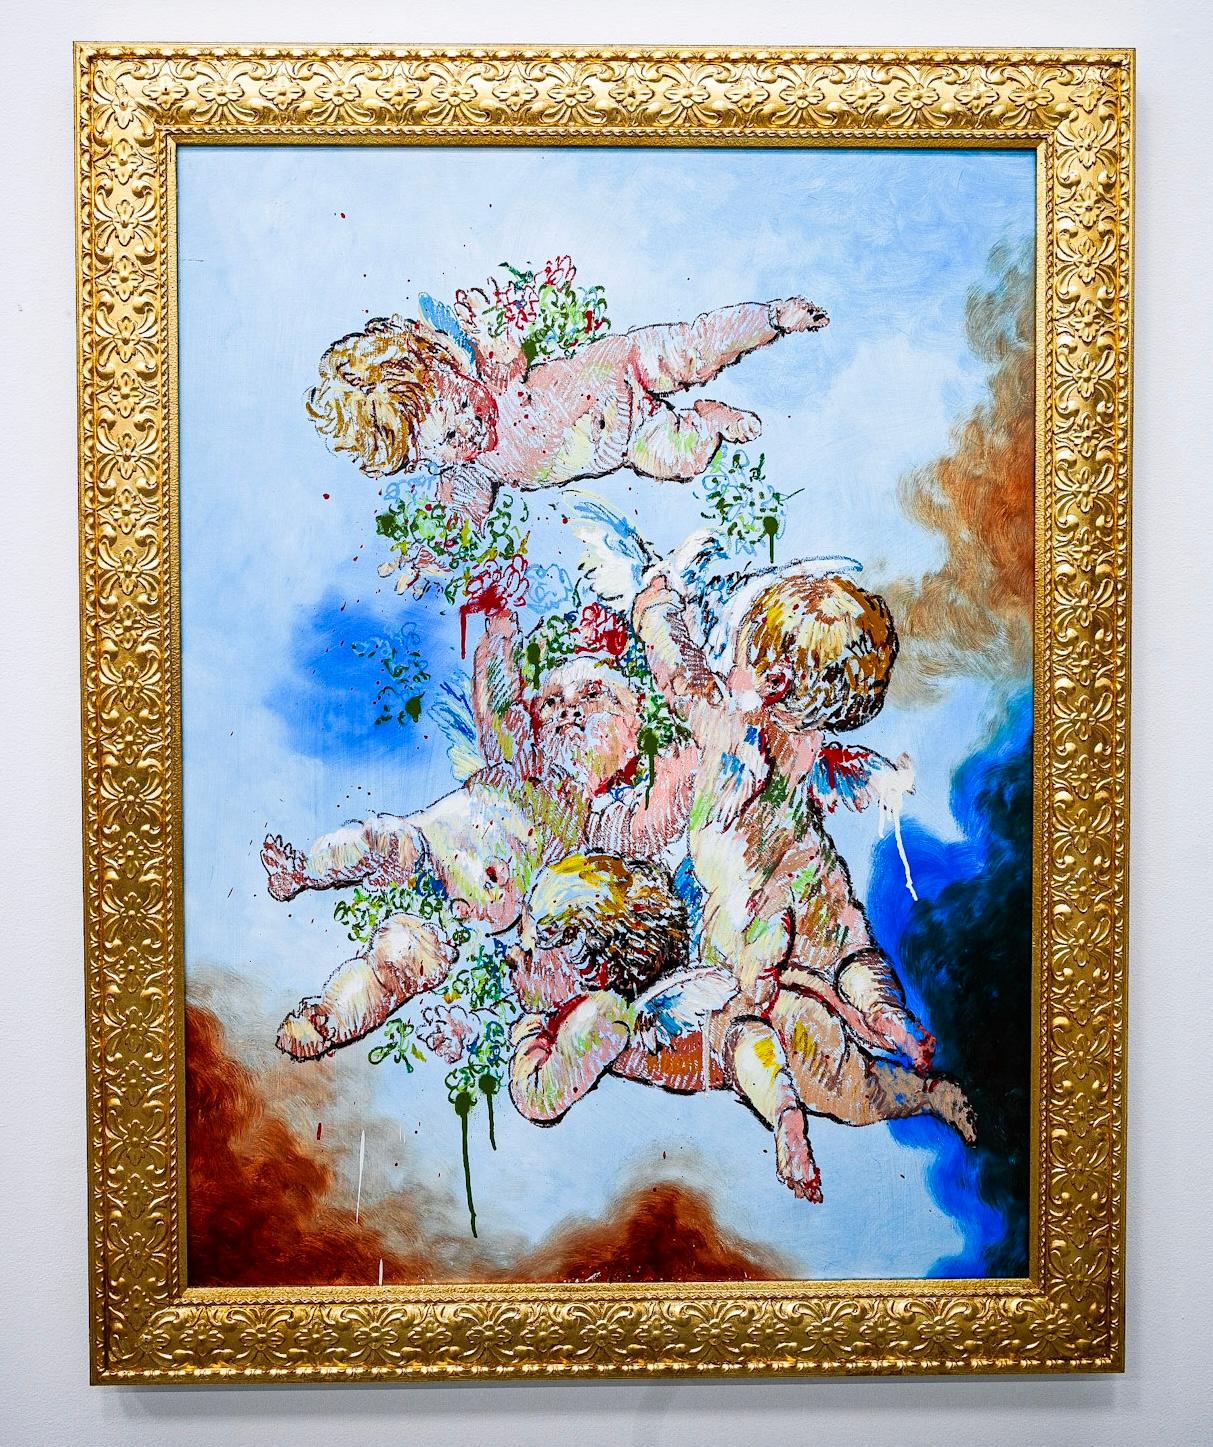 "Oceans Four" Oil Painting (FRAMED) 48" x 36" inch by Isaac Pelayo

Medium: Oil, oil stick, and aerosol on wood 
Comes in antique frame (wood & gold leaf)
Size framed: 55.5" x 43.5" inch

ABOUT THE ARTIST: 


Isaac Pelayo is a head on crash